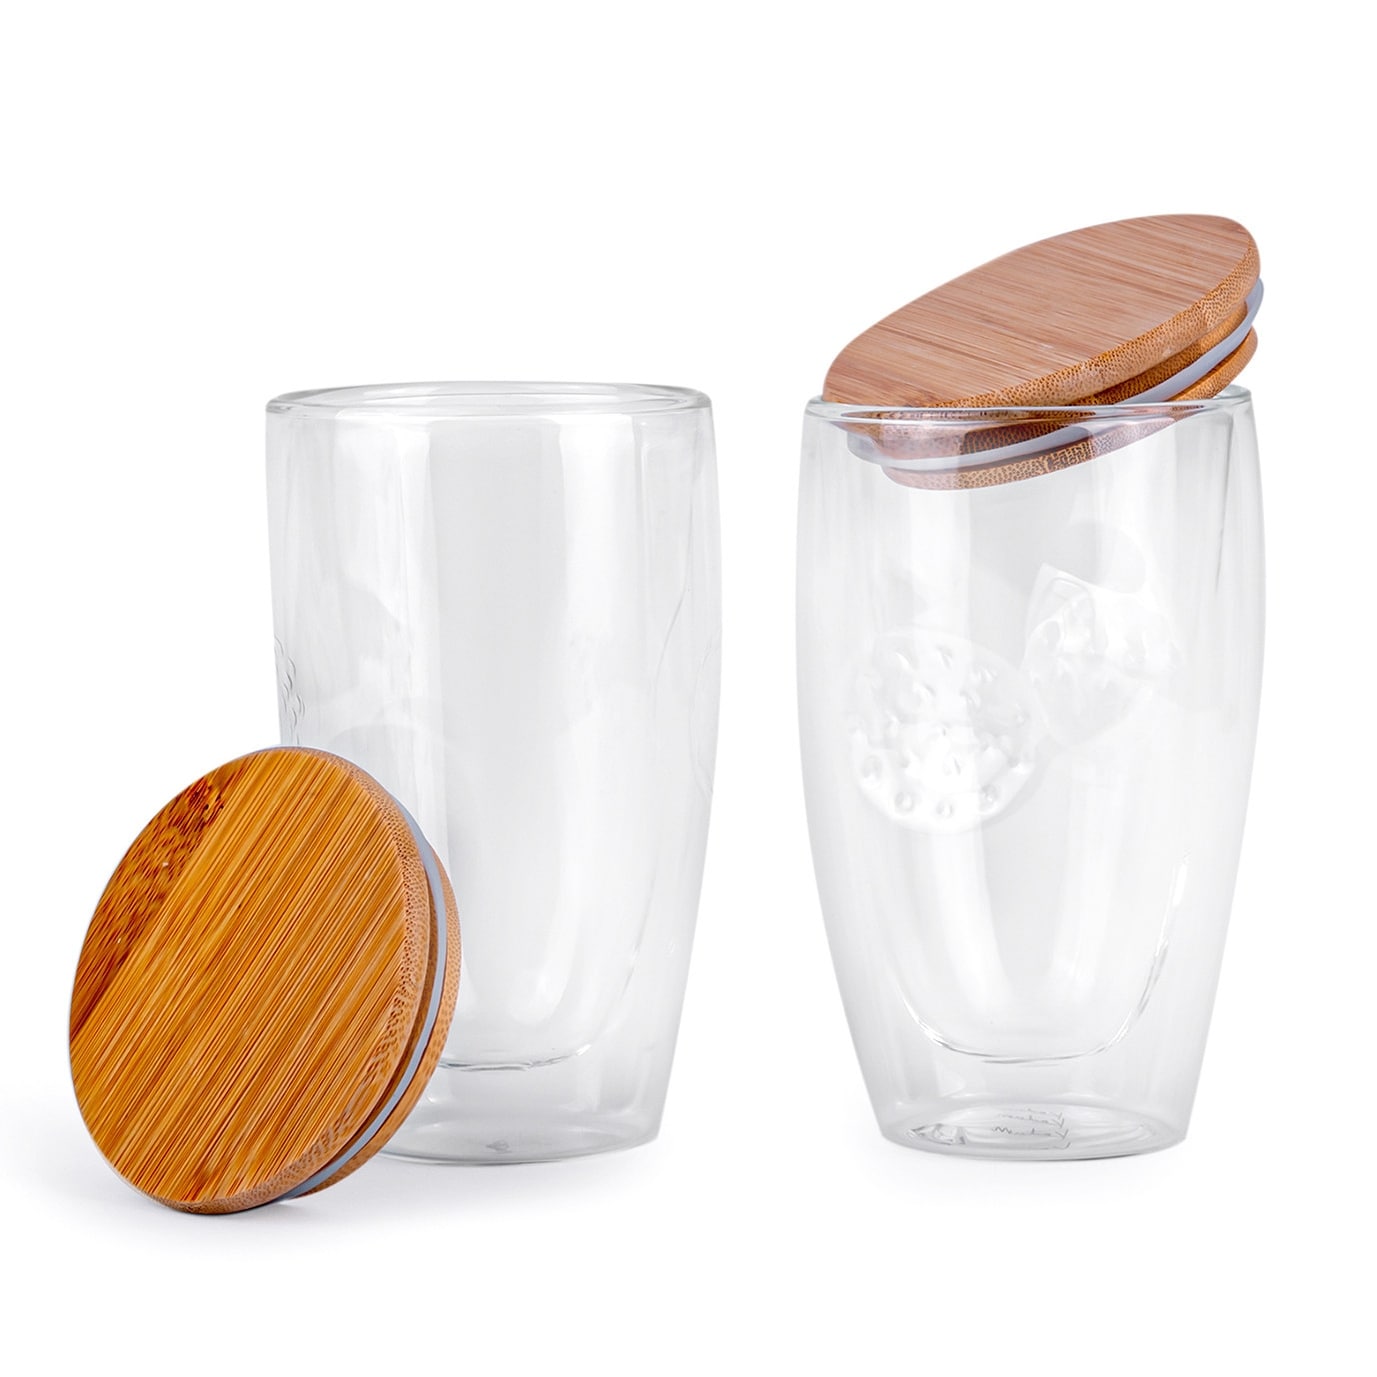 STP Goods Insulated Double Wall Glass Set of 2 w/ Bamboo Lids